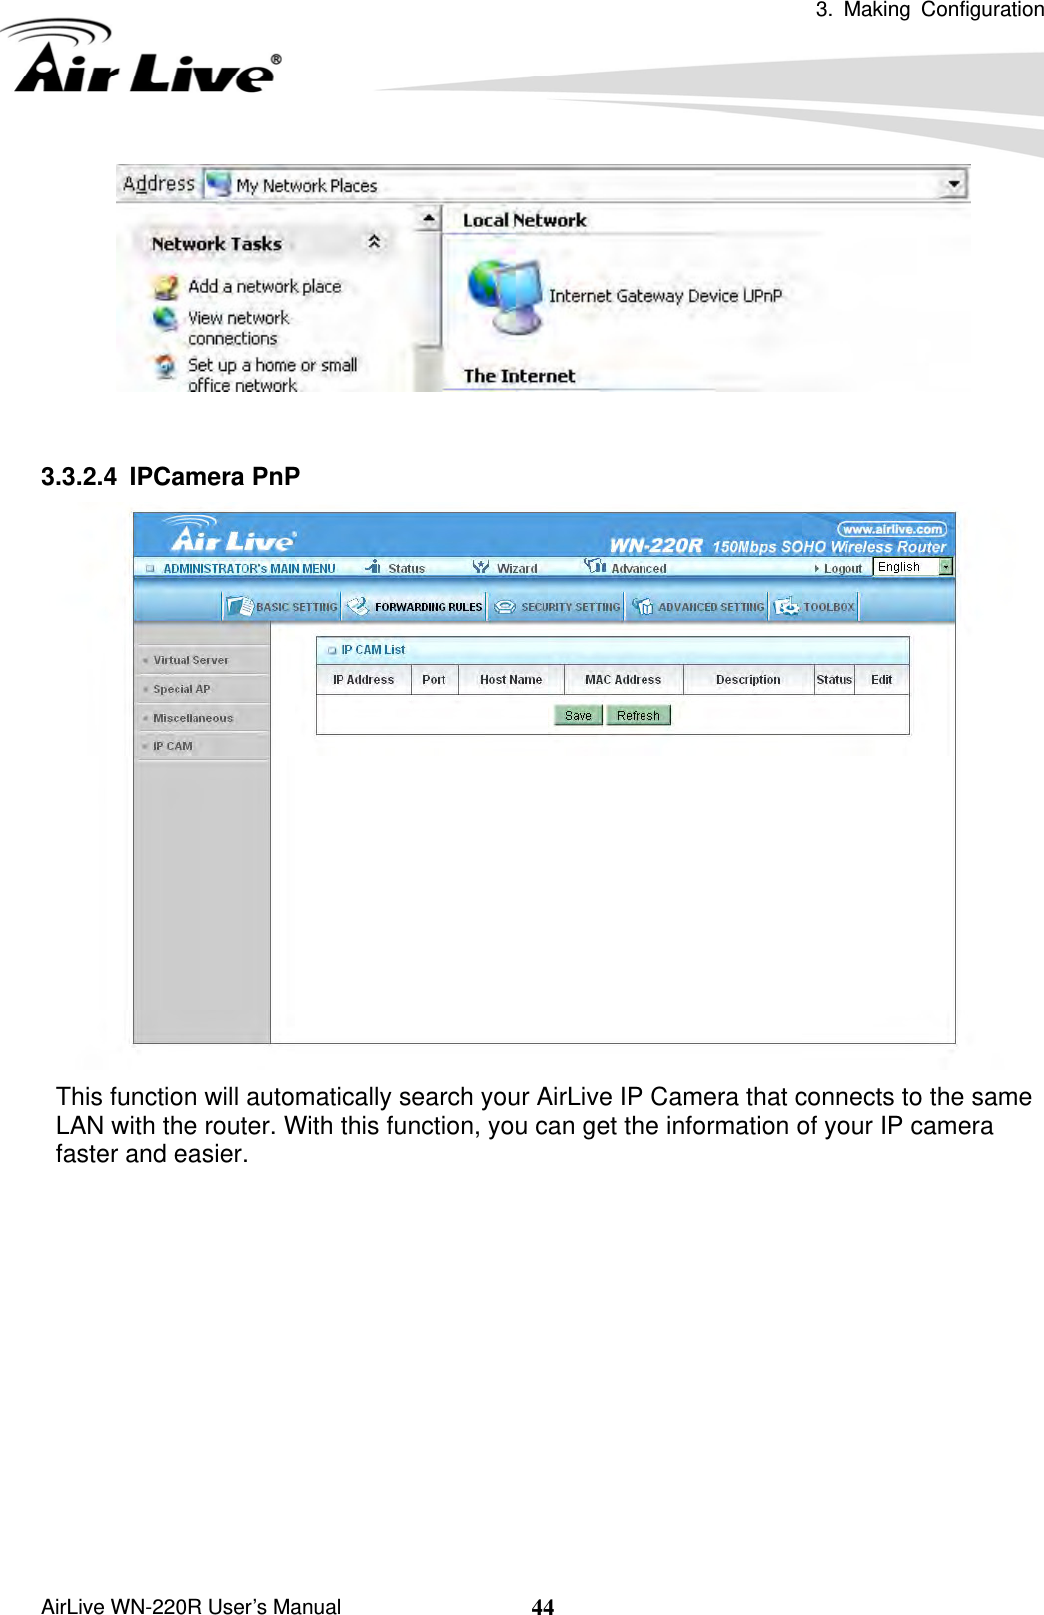  3. Making Configuration       AirLive WN-220R User’s Manual  44   3.3.2.4 IPCamera PnP  This function will automatically search your AirLive IP Camera that connects to the same LAN with the router. With this function, you can get the information of your IP camera faster and easier.  